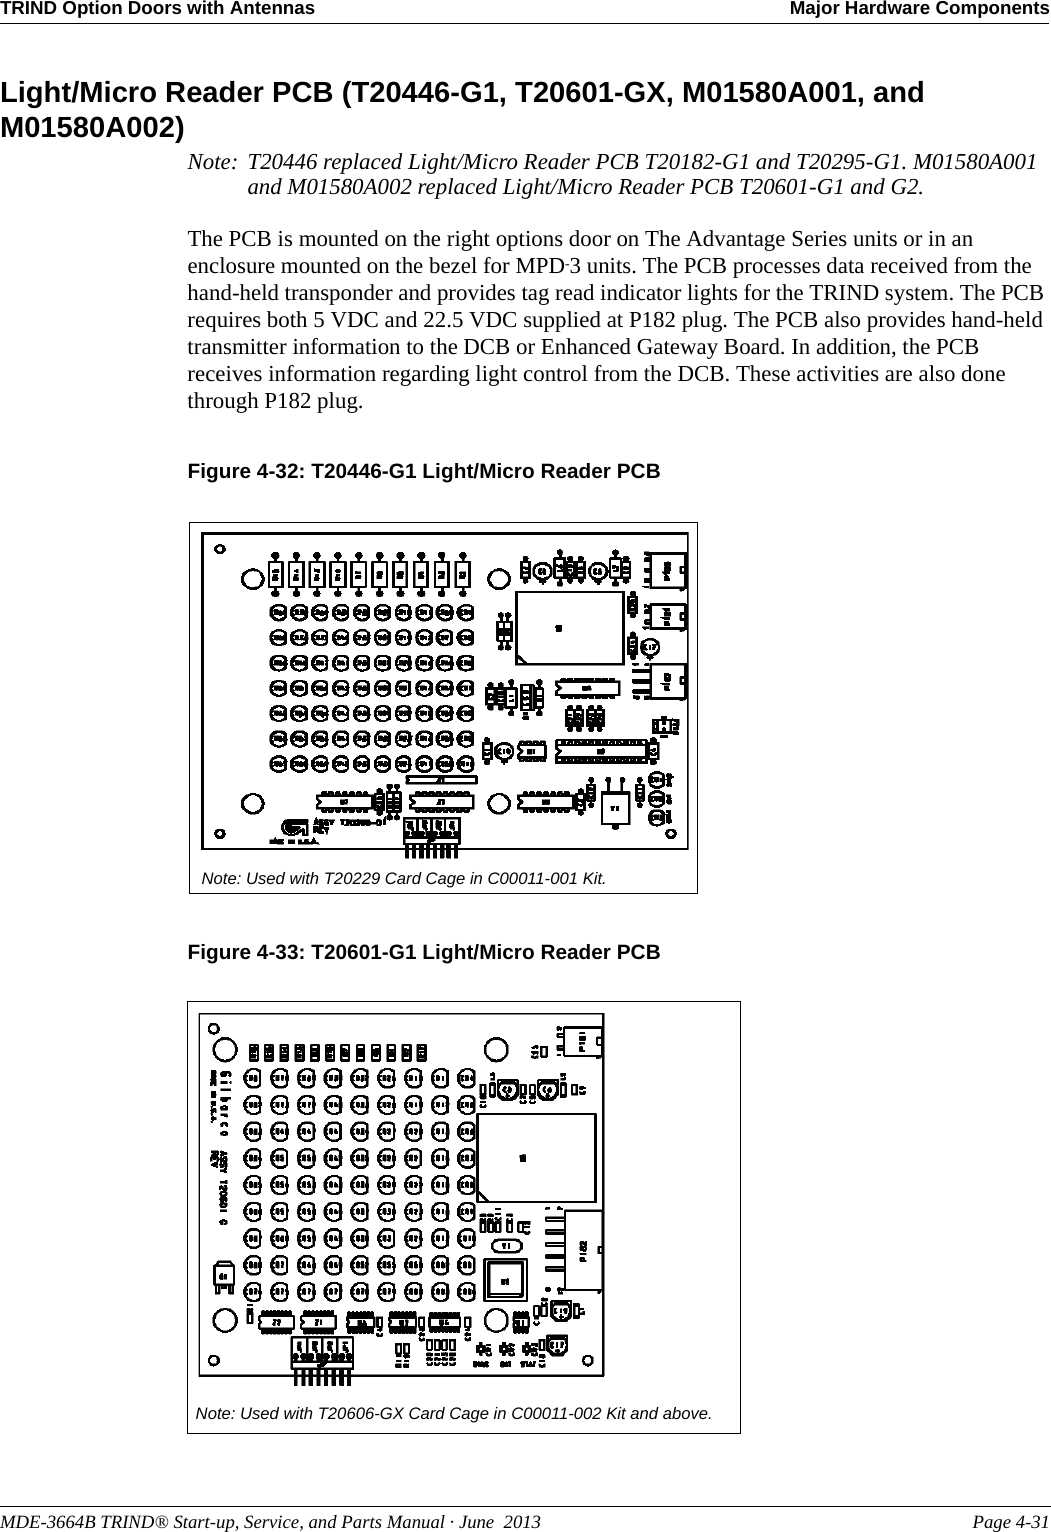 MDE-3664B TRIND® Start-up, Service, and Parts Manual · June  2013 Page 4-31TRIND Option Doors with Antennas Major Hardware ComponentsLight/Micro Reader PCB (T20446-G1, T20601-GX, M01580A001, and M01580A002)Note: T20446 replaced Light/Micro Reader PCB T20182-G1 and T20295-G1. M01580A001 and M01580A002 replaced Light/Micro Reader PCB T20601-G1 and G2.The PCB is mounted on the right options door on The Advantage Series units or in an enclosure mounted on the bezel for MPD-3 units. The PCB processes data received from the hand-held transponder and provides tag read indicator lights for the TRIND system. The PCB requires both 5 VDC and 22.5 VDC supplied at P182 plug. The PCB also provides hand-held transmitter information to the DCB or Enhanced Gateway Board. In addition, the PCB receives information regarding light control from the DCB. These activities are also done through P182 plug.Figure 4-32: T20446-G1 Light/Micro Reader PCBNote: Used with T20229 Card Cage in C00011-001 Kit.Figure 4-33: T20601-G1 Light/Micro Reader PCBNote: Used with T20606-GX Card Cage in C00011-002 Kit and above.